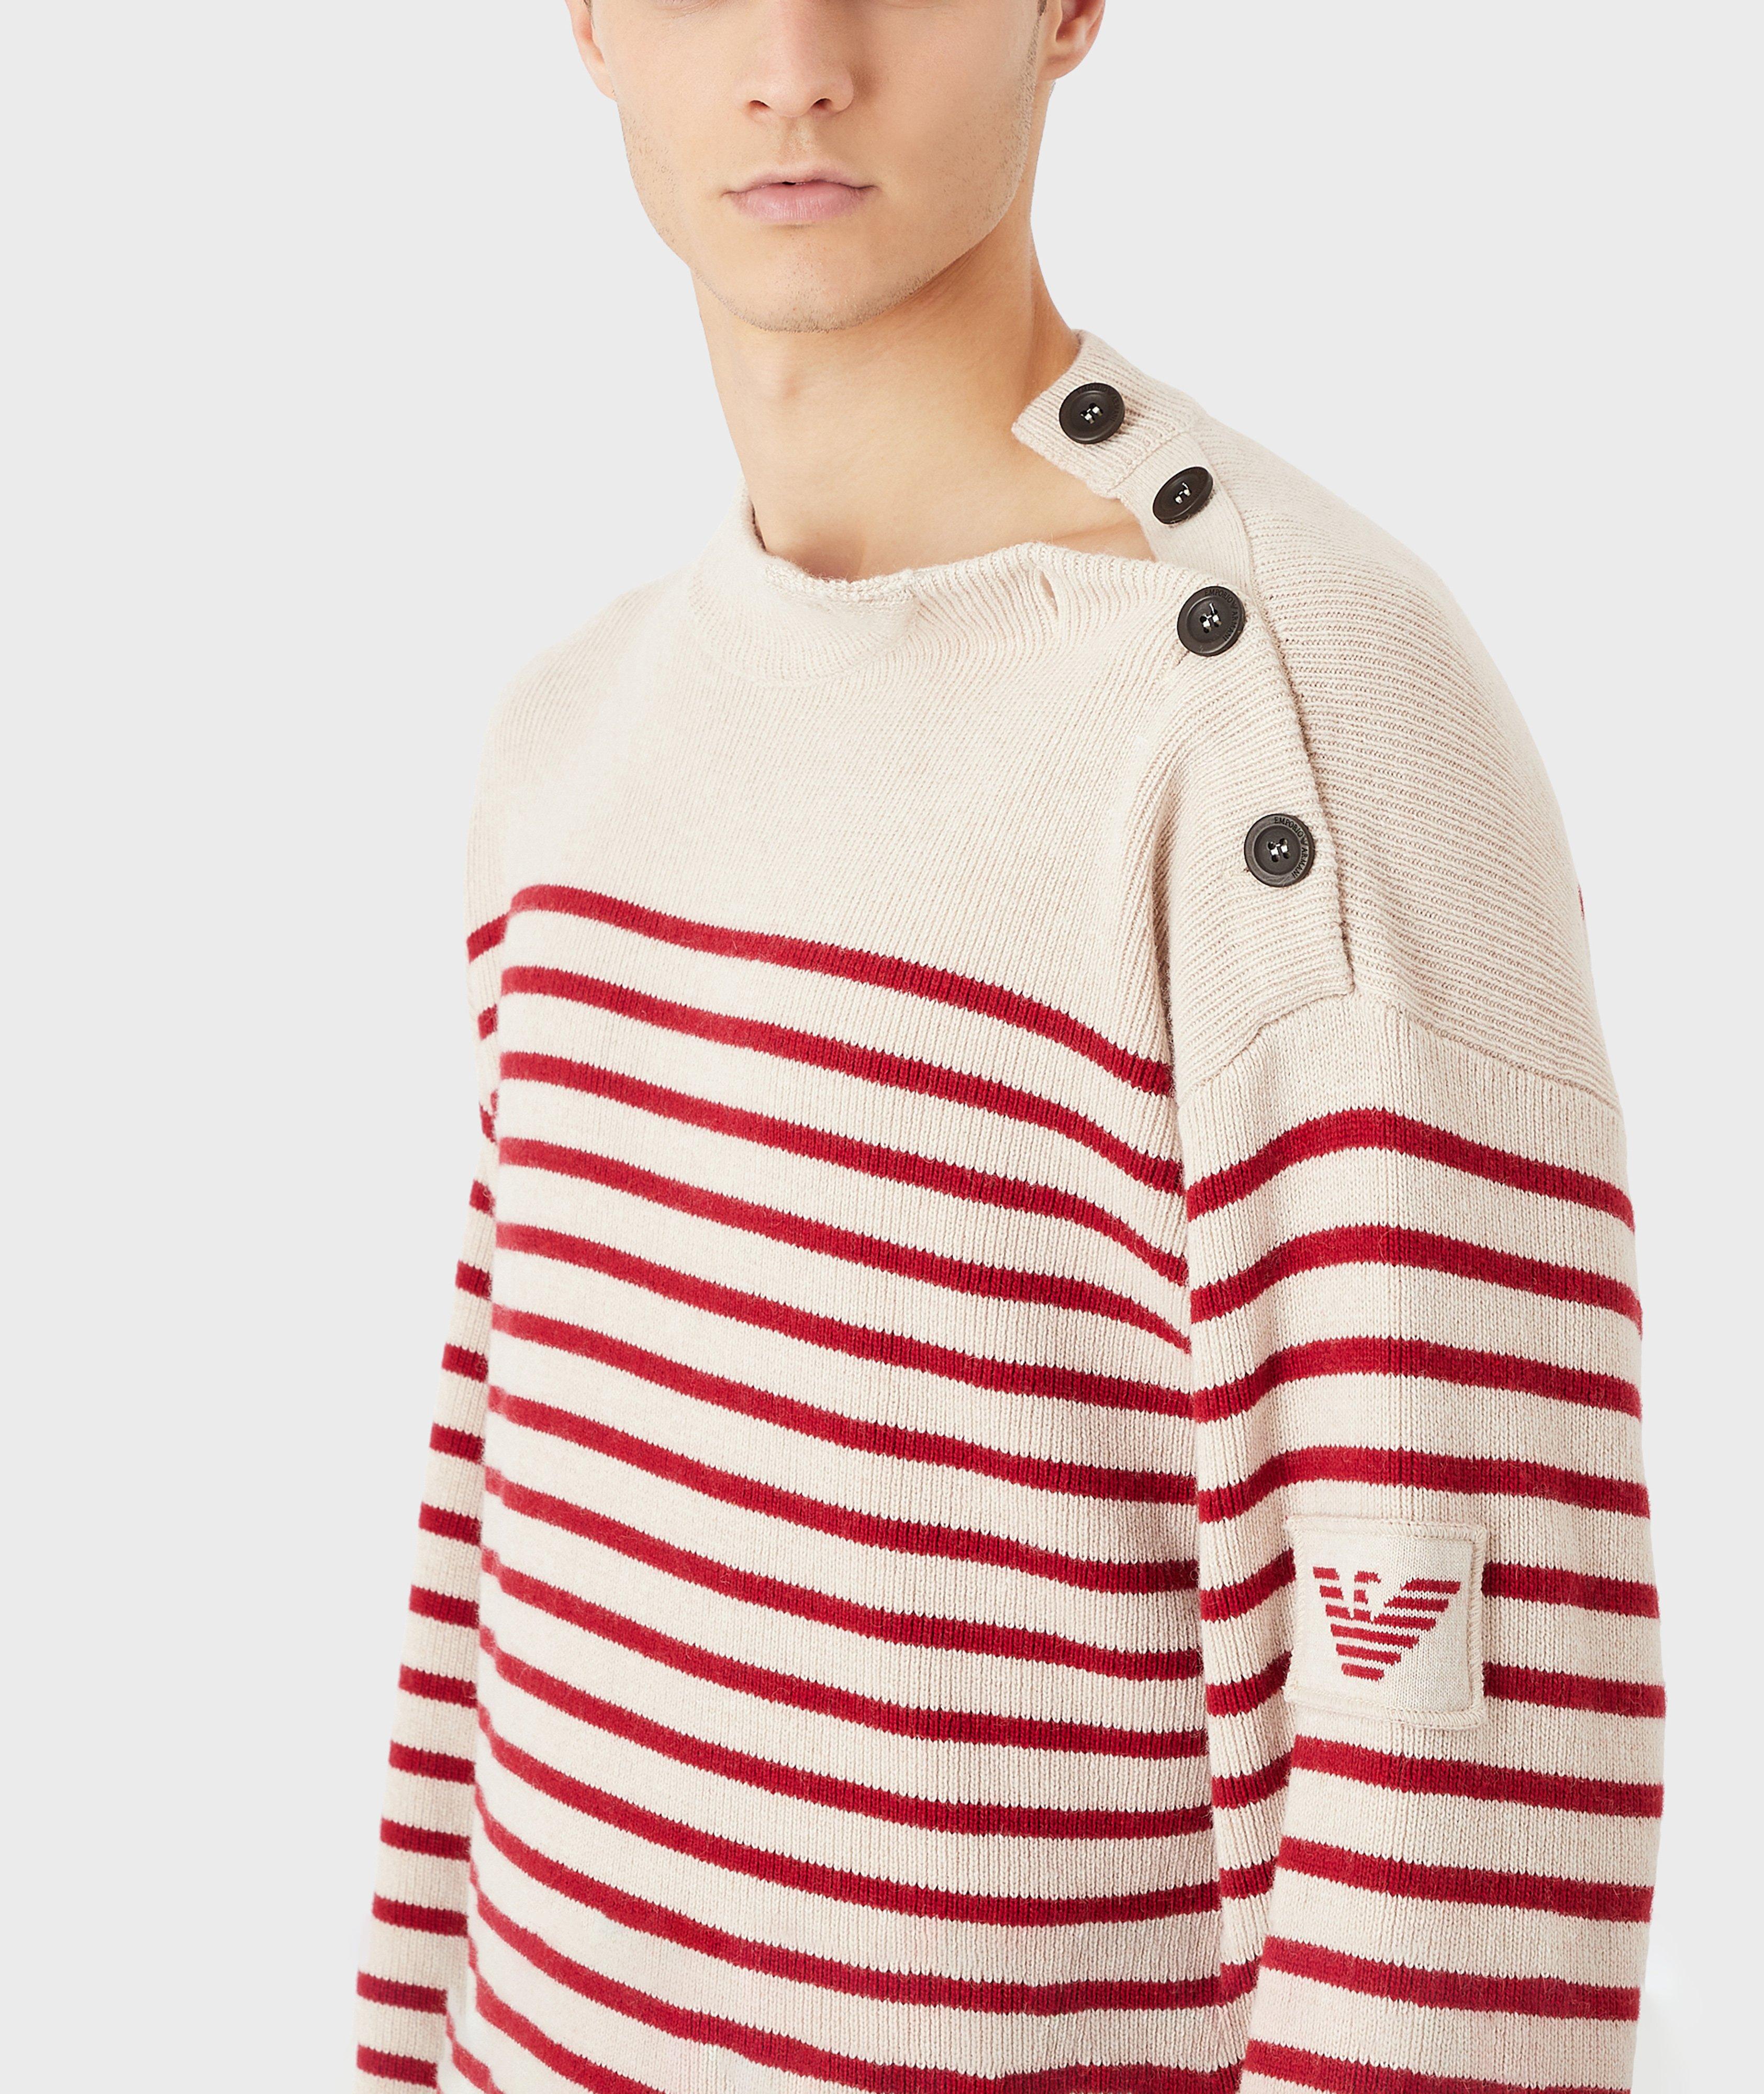 EArctic Sustainable Collection Wool-Blend Striped Jumper image 3